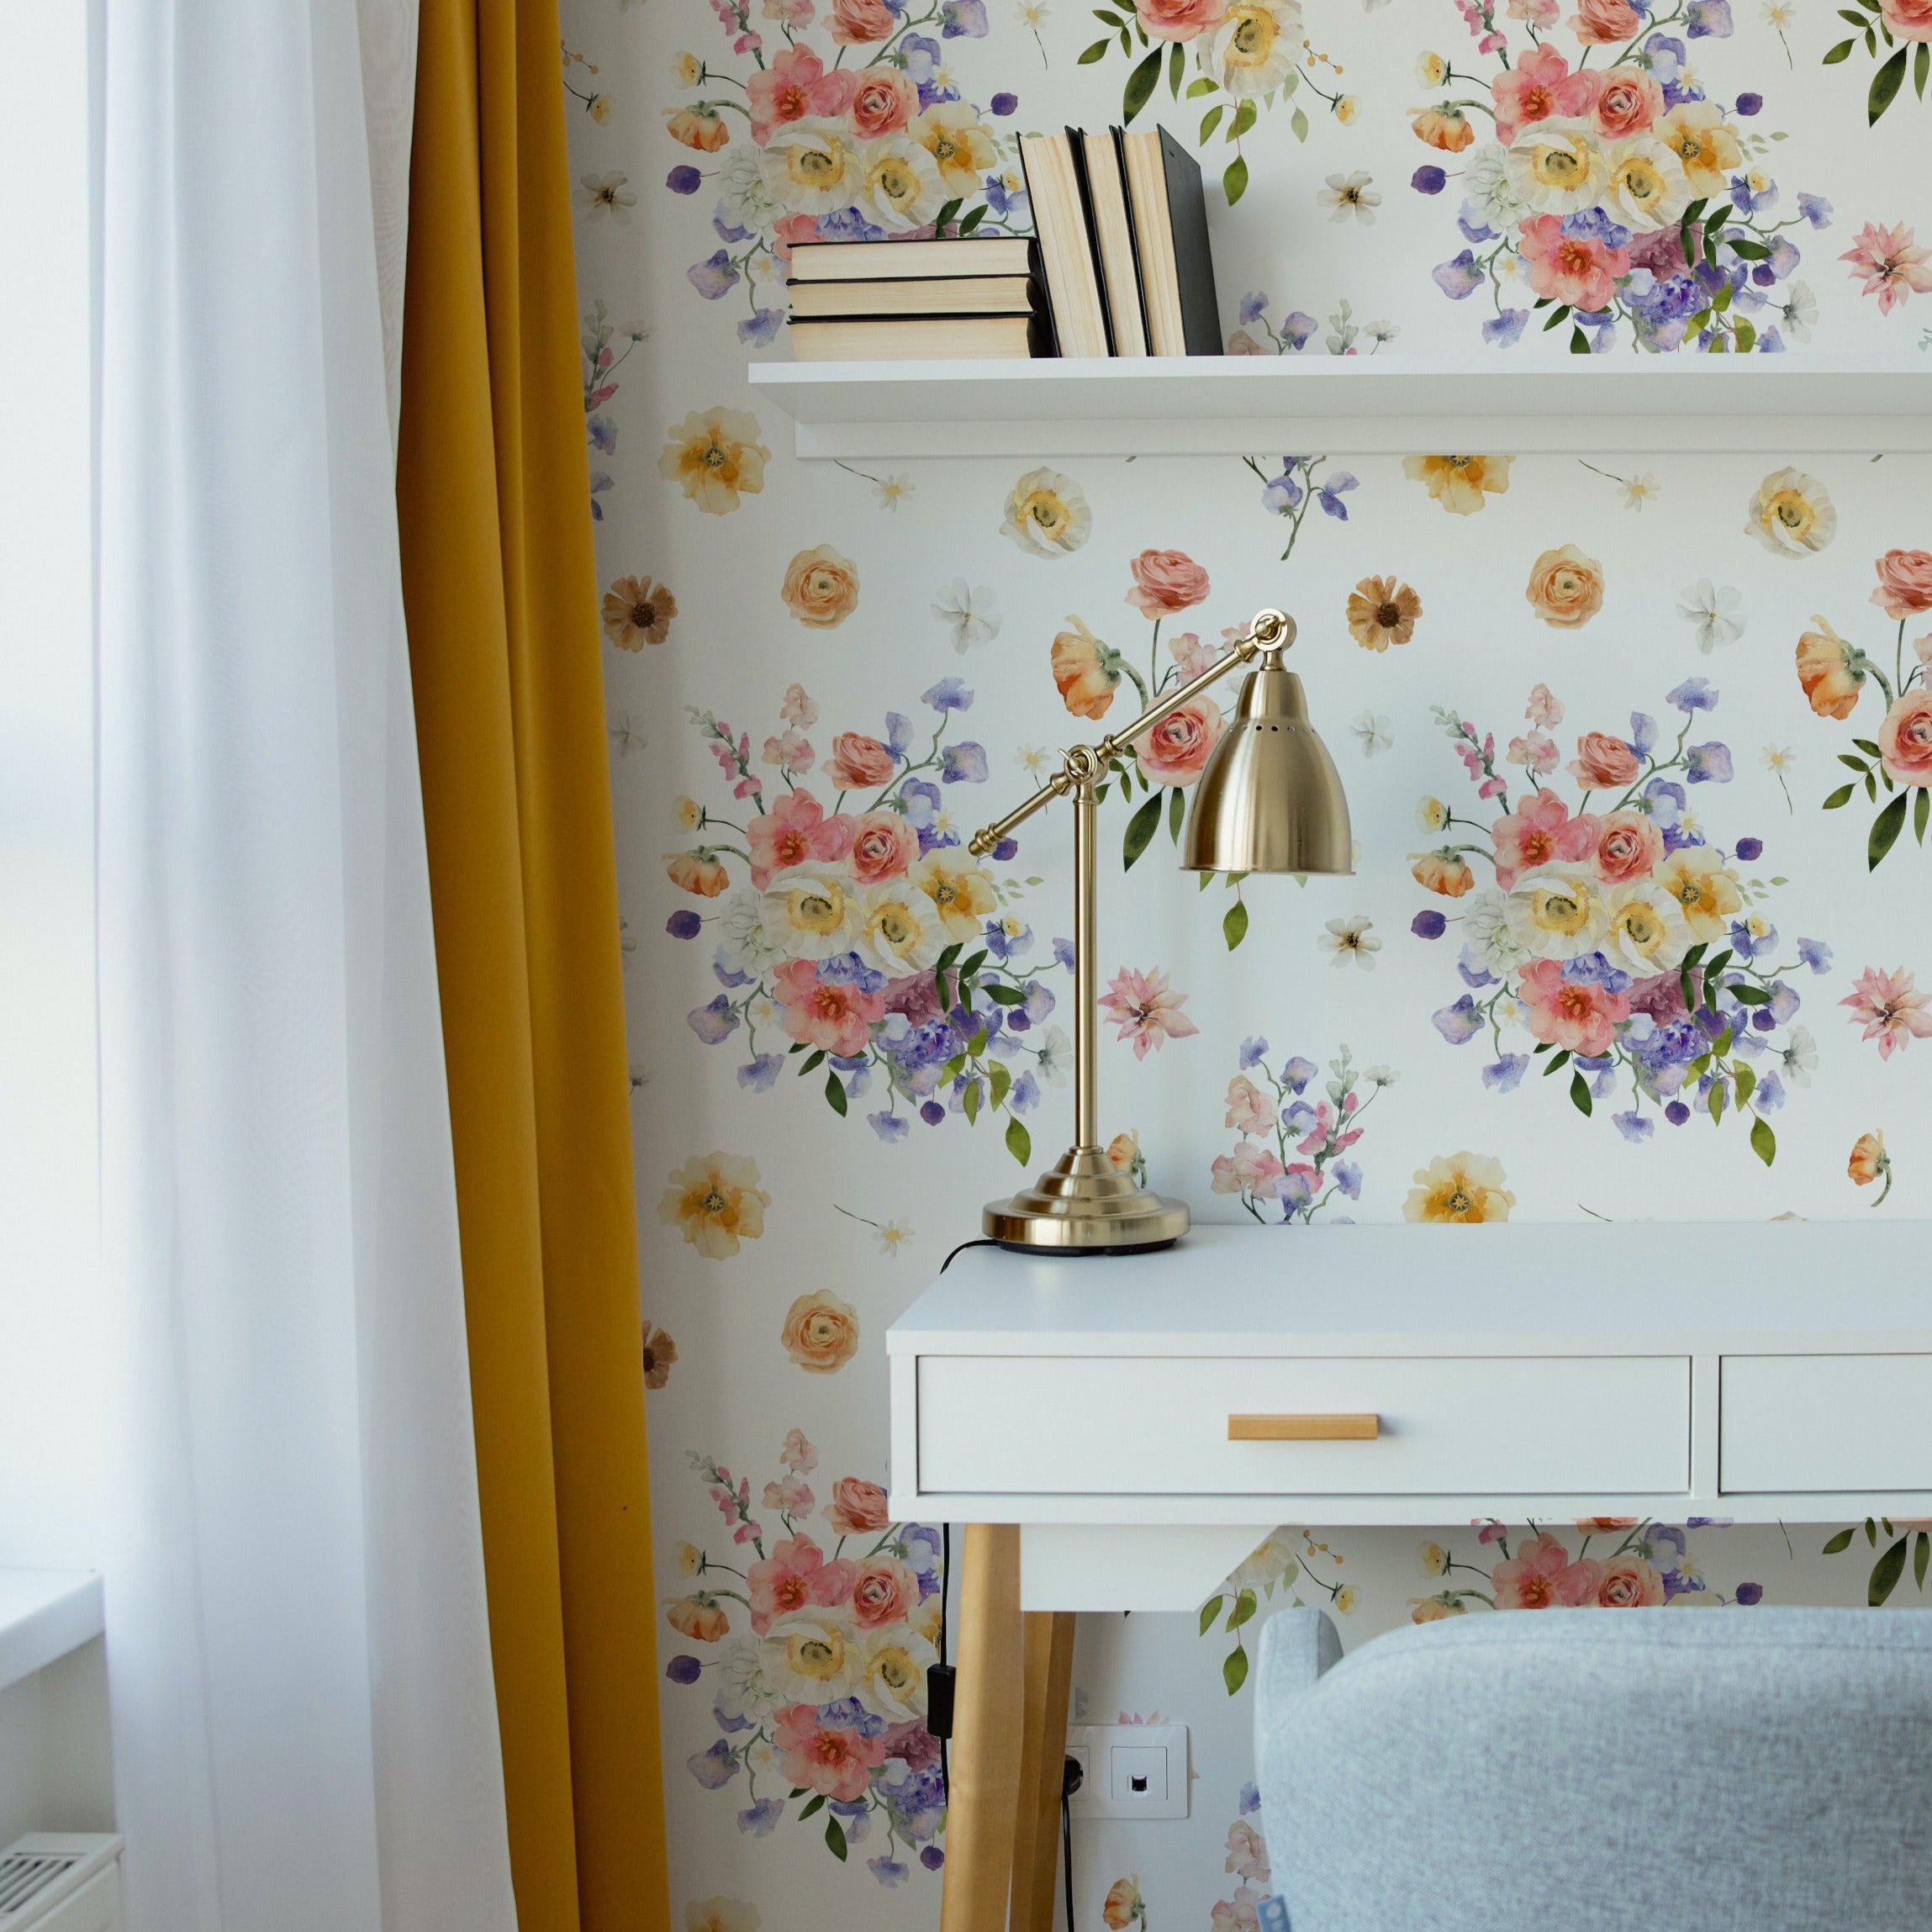 A bright and vibrant home office space adorned with Bouquet Bliss Wallpaper, featuring a lively floral design with large clusters of colorful flowers. The workspace includes a white desk with a gold lamp and is accented by a yellow curtain, enhancing the cheerful and inviting atmosphere.